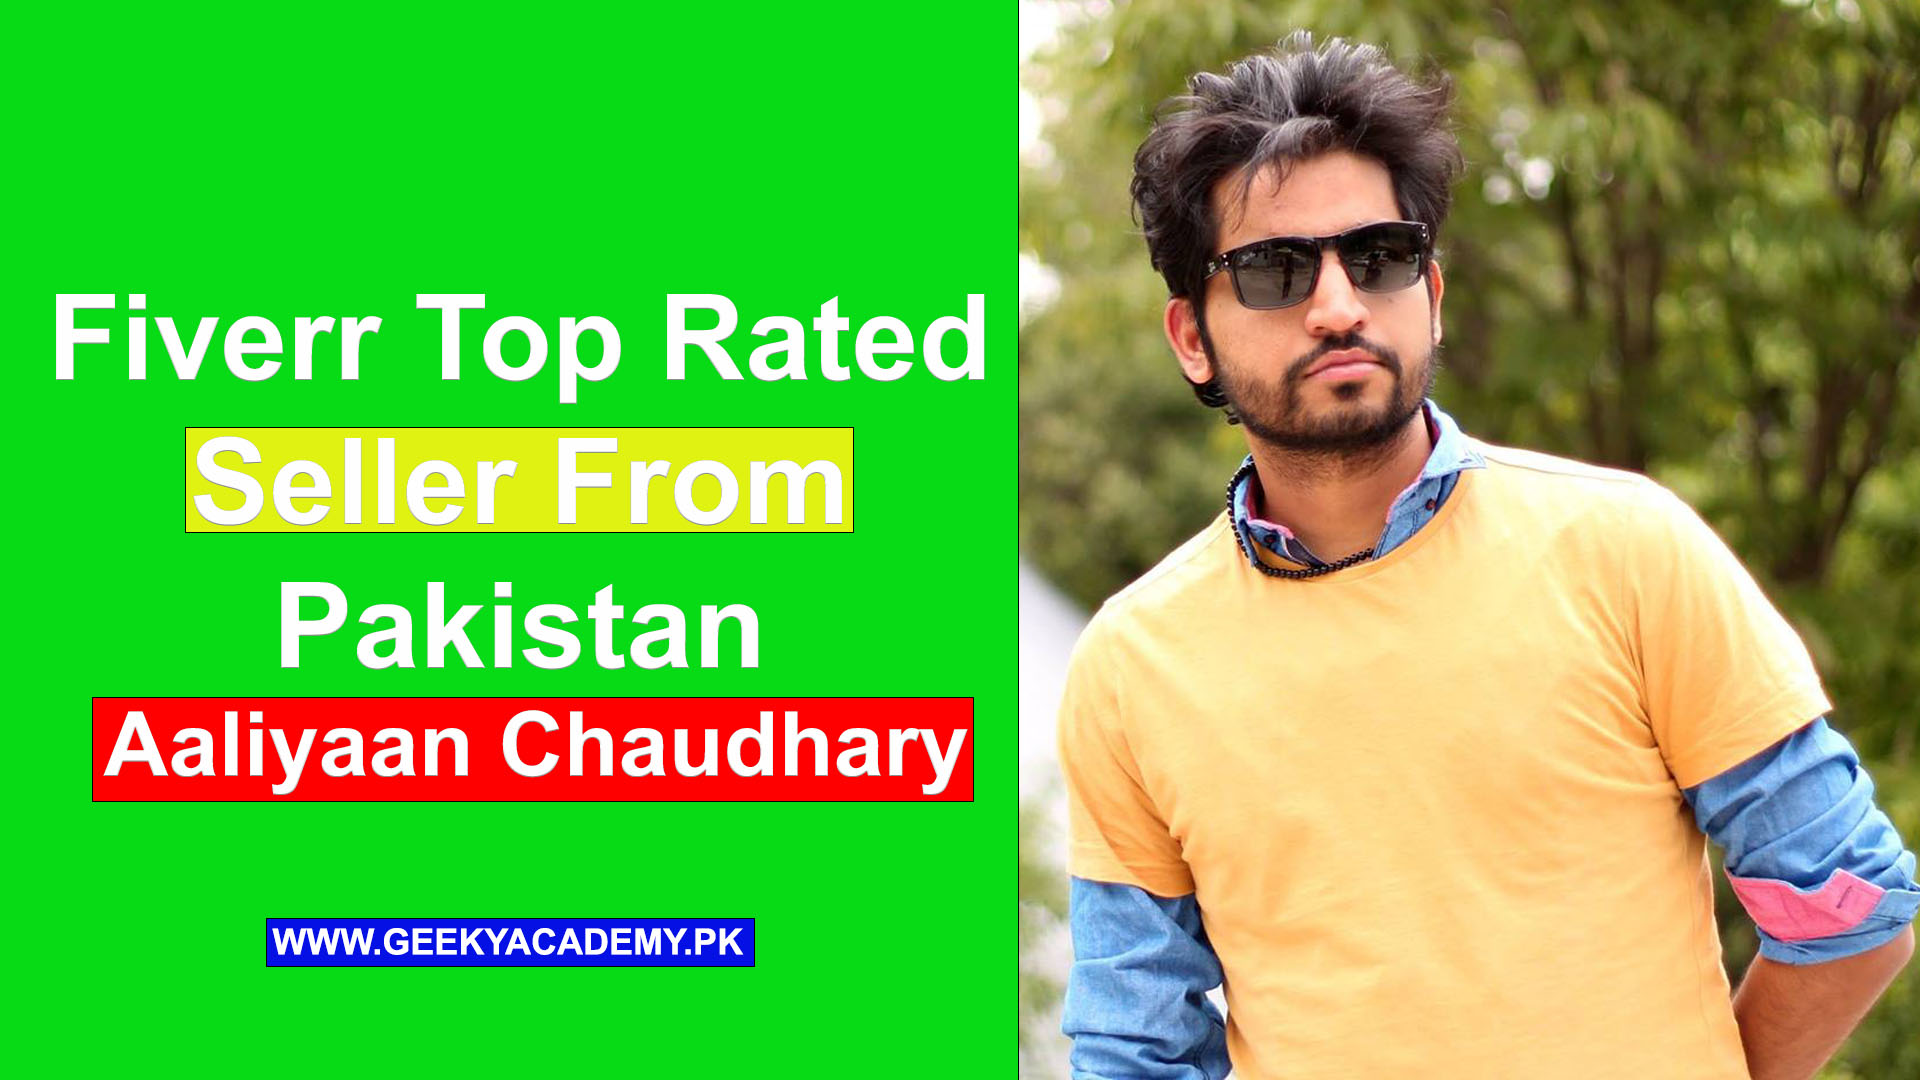 Fiverr Top Rated Seller From Pakistan Aaliyaan Chaudhary